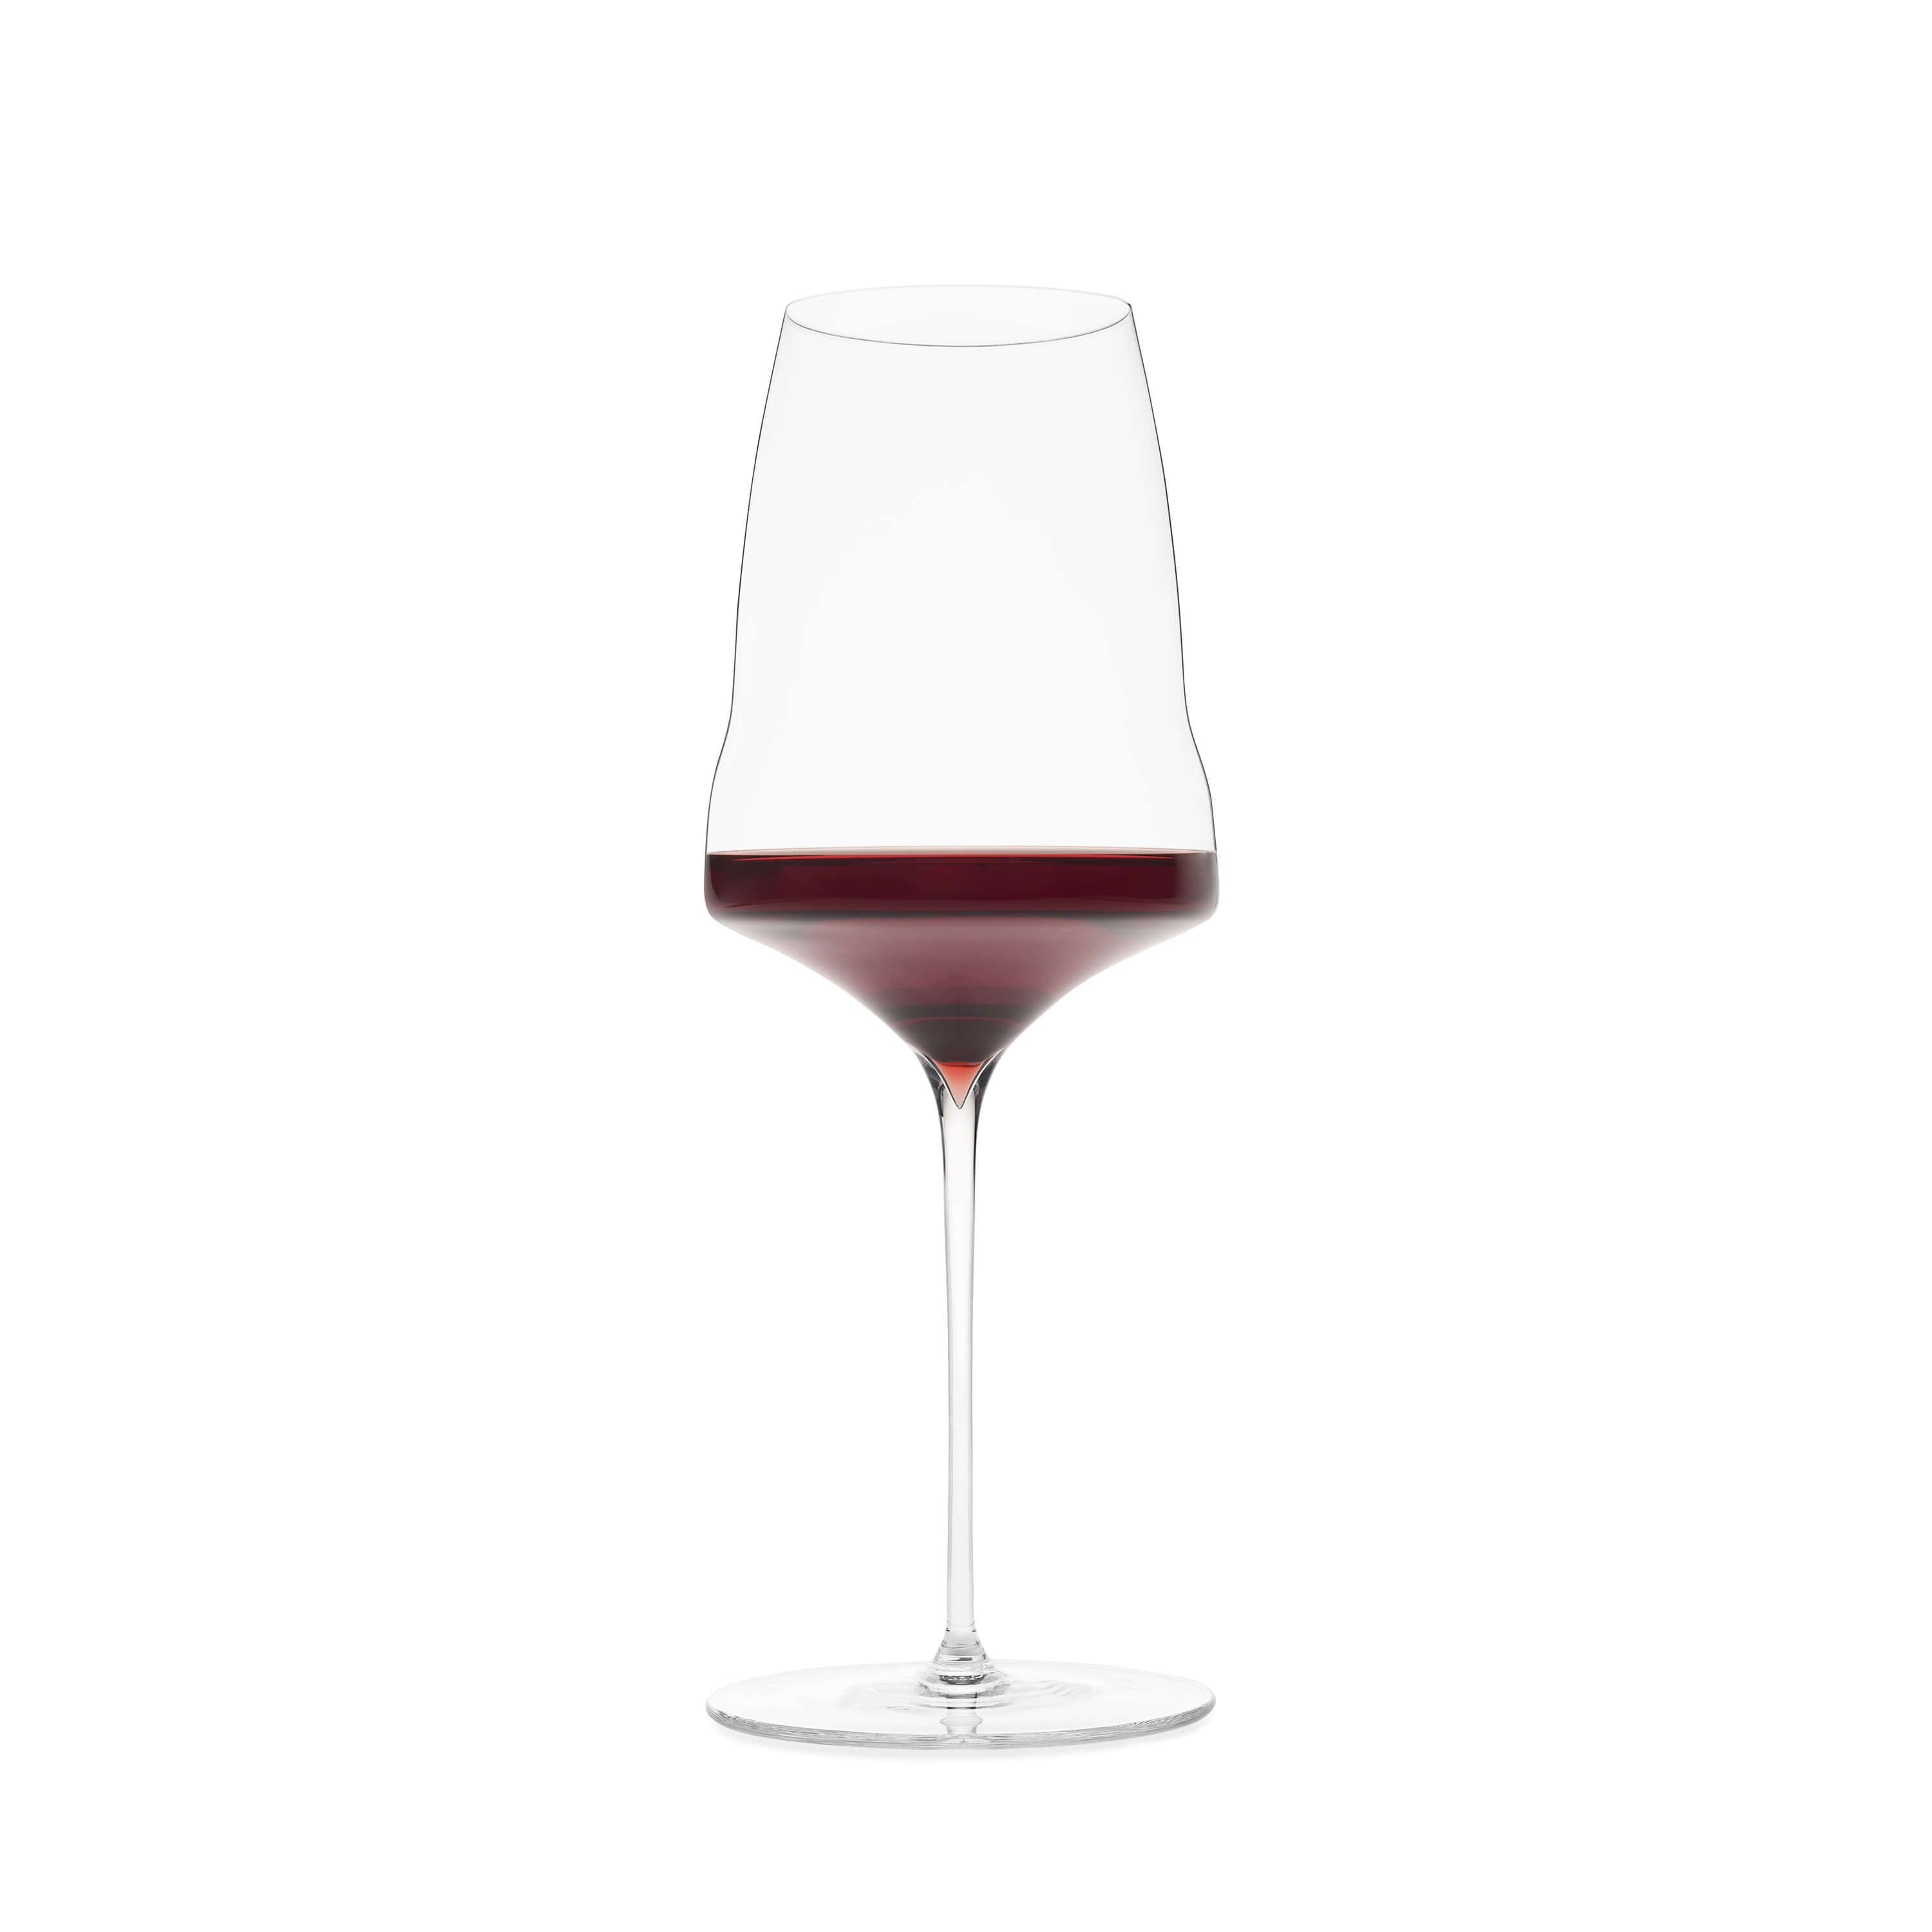 Universal glass No. 2 by Josephine filled with wine